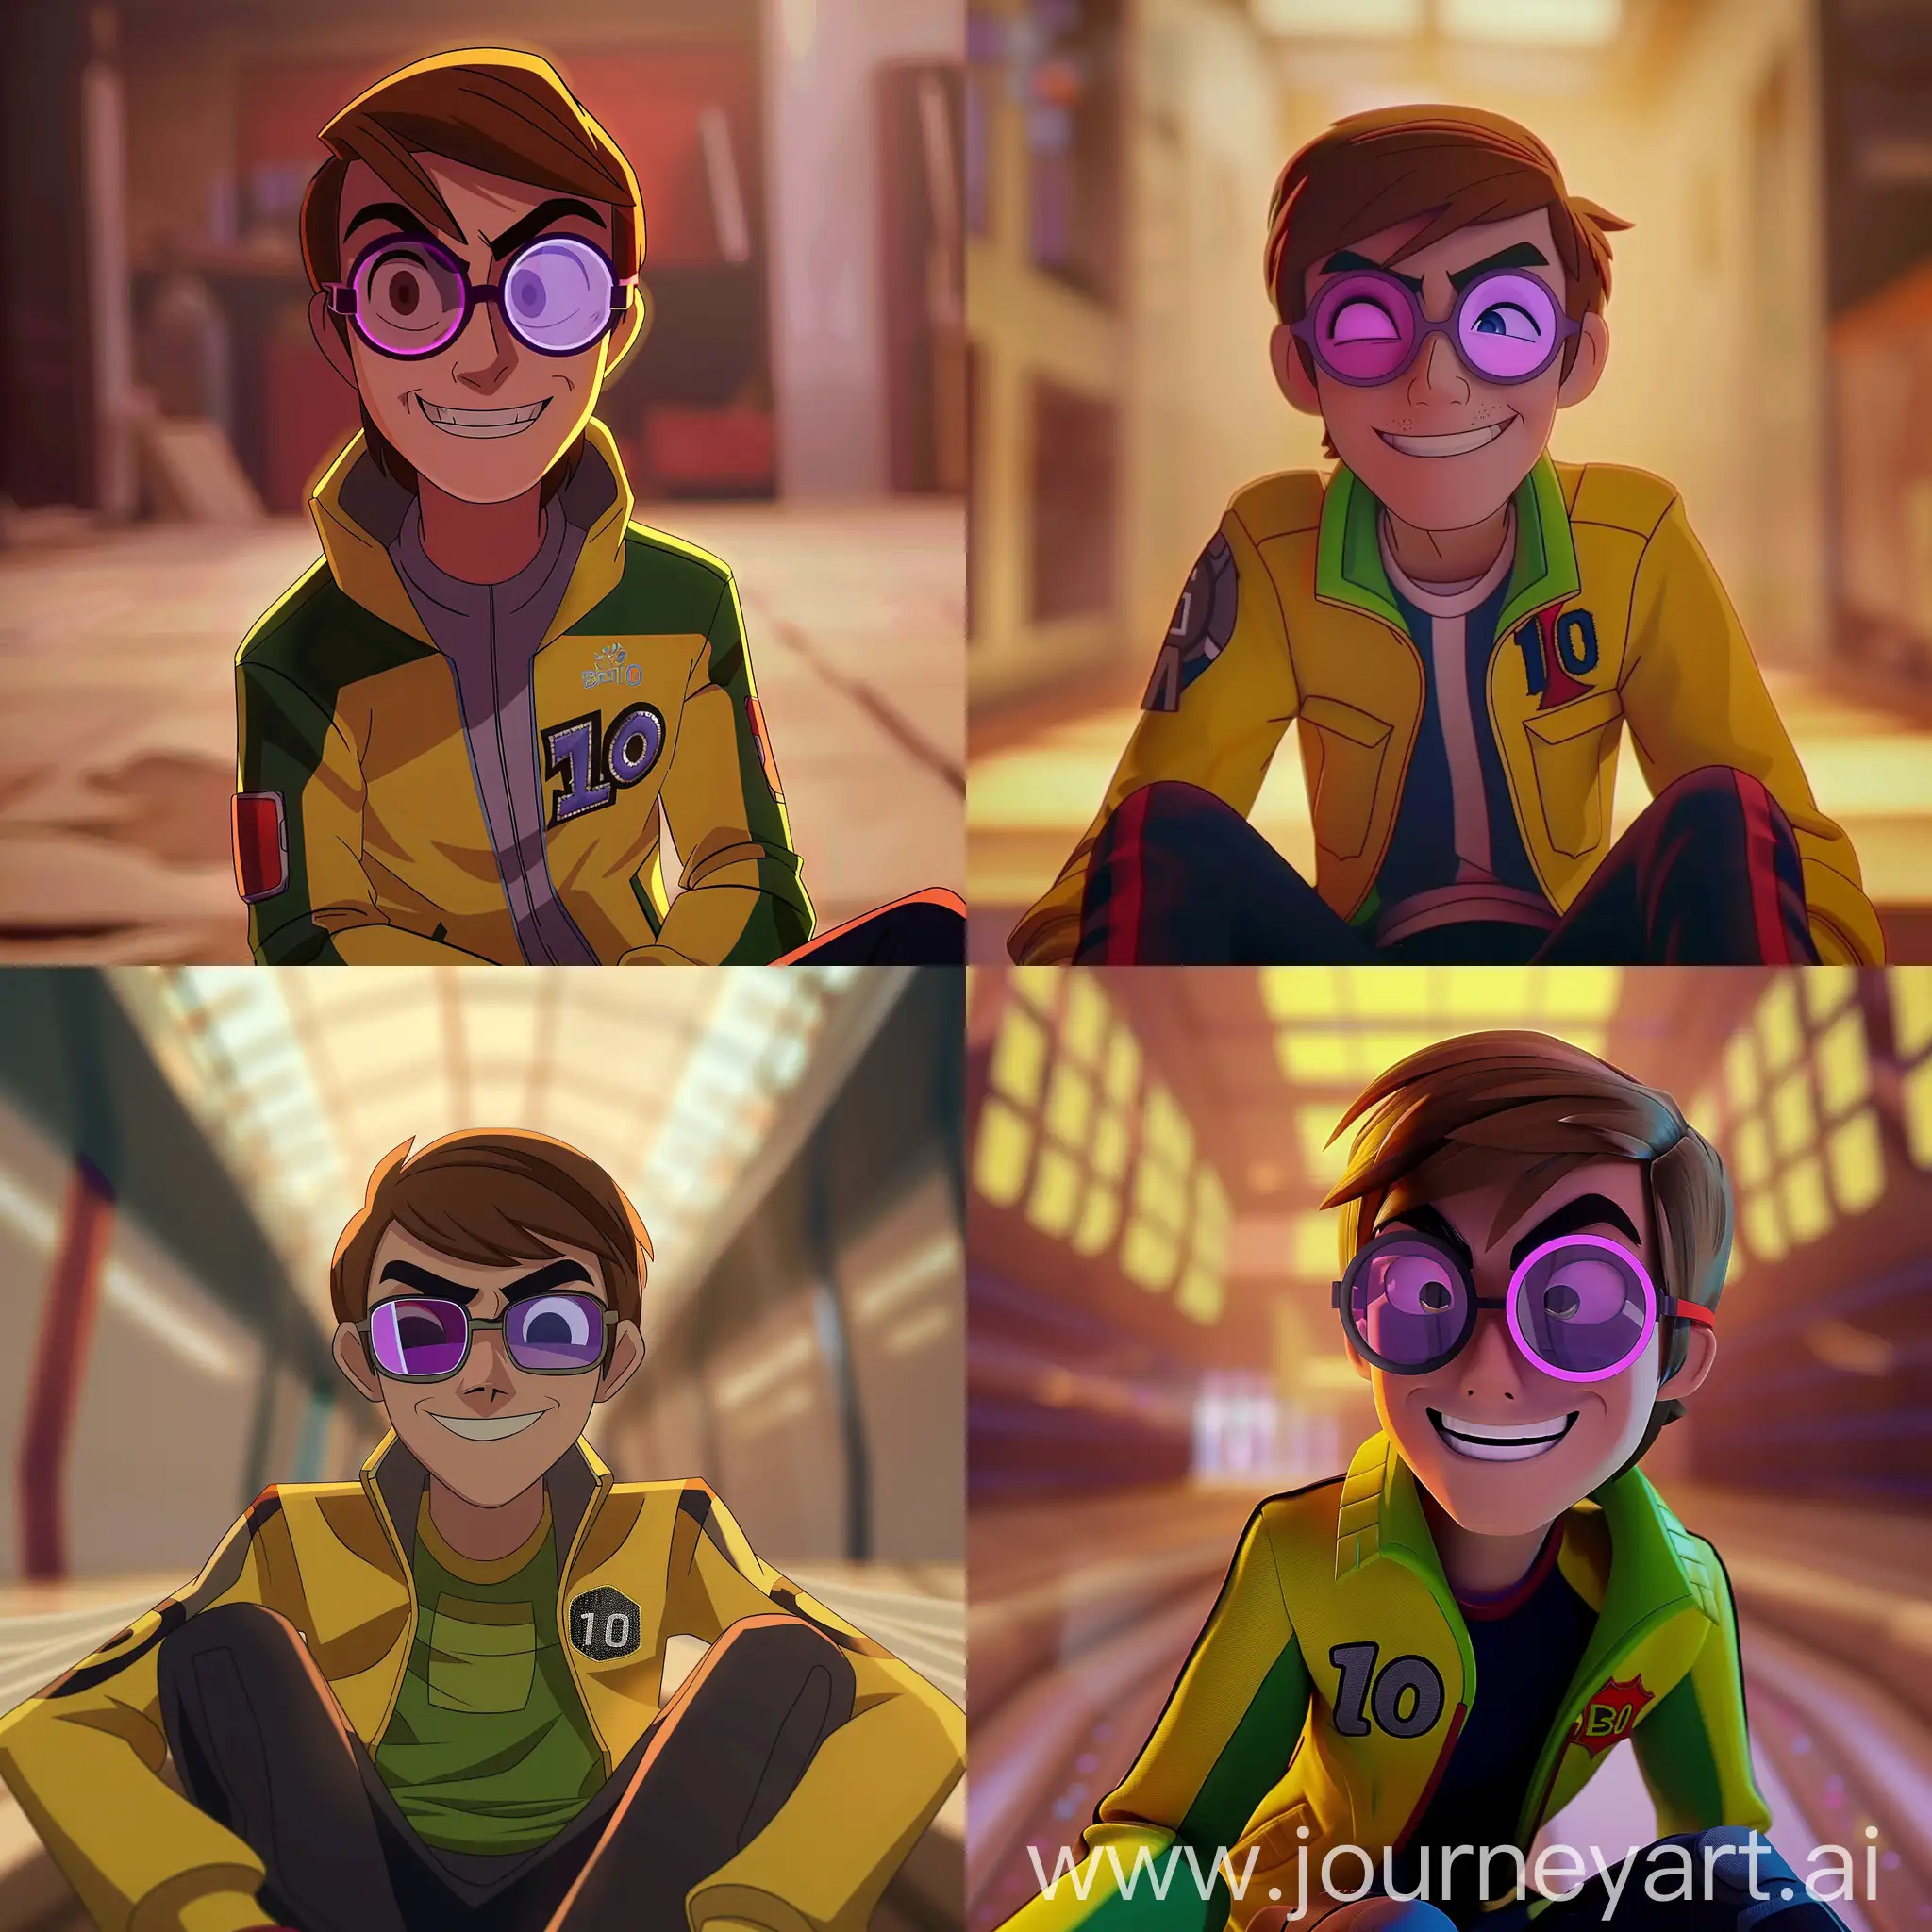 Cheerful-Ben-10-Cartoon-Character-with-Unique-Glasses